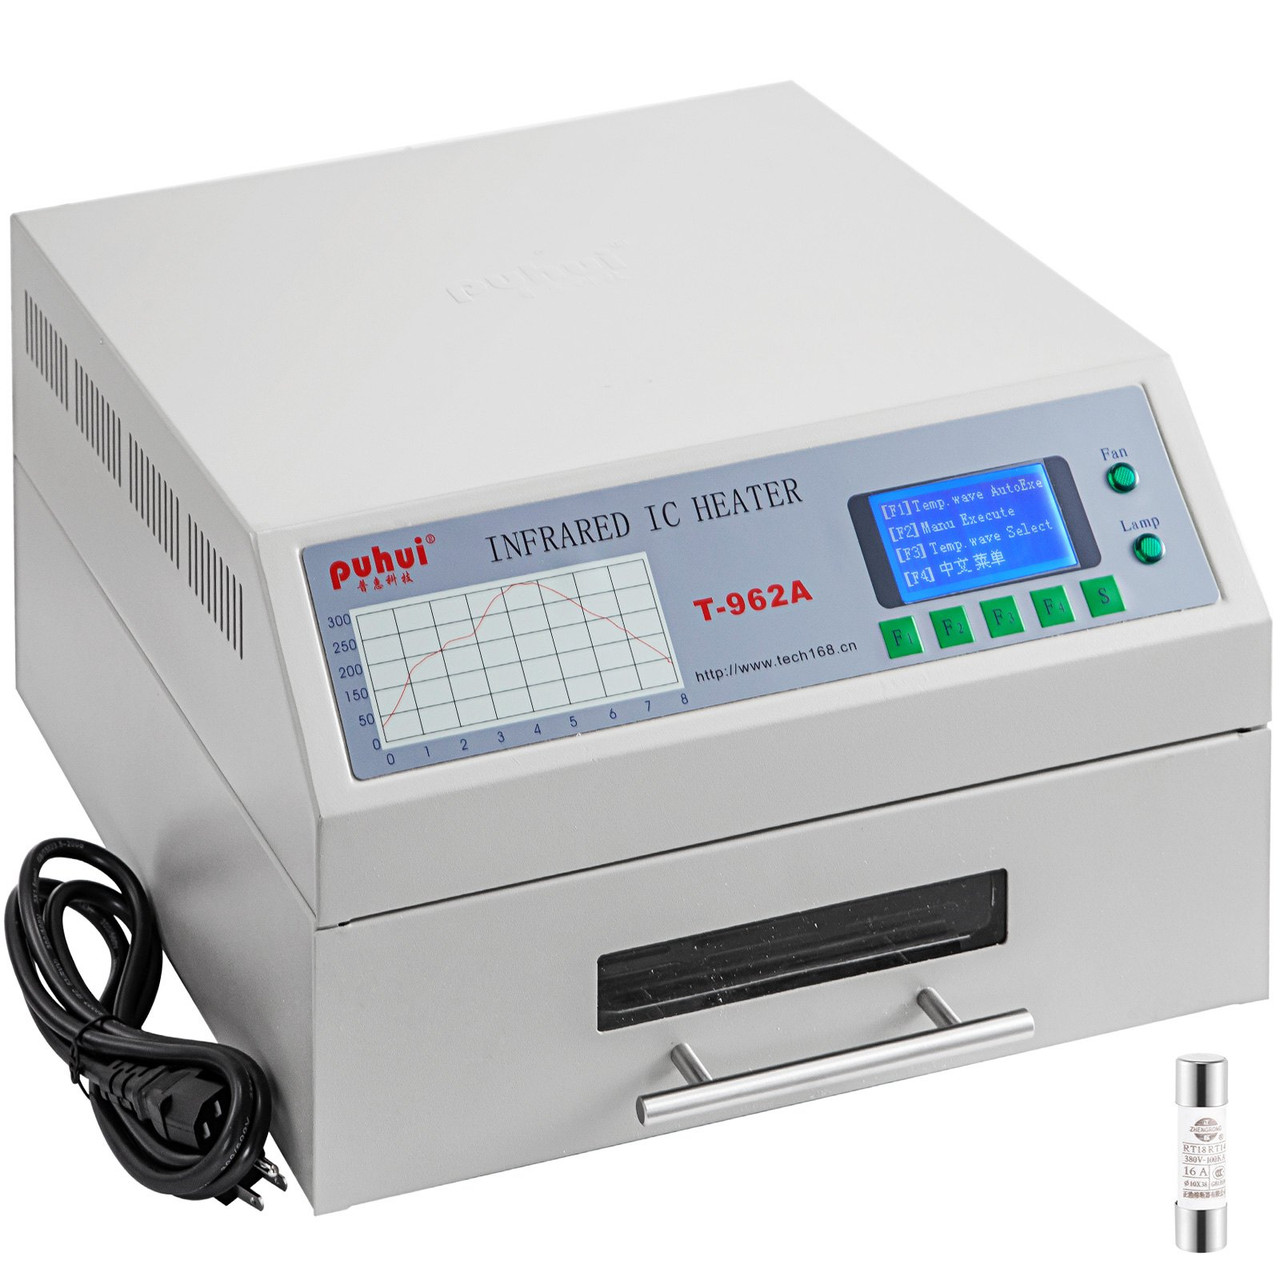 Reflow Oven T962A 110V Reflow Soldering Machine 1500W 300 x 320 mm SMD SMT BGA Professional Automatic Infrared Heater Soldering Machine W/Smoke Exhaust Chimney Cooling Efficiency